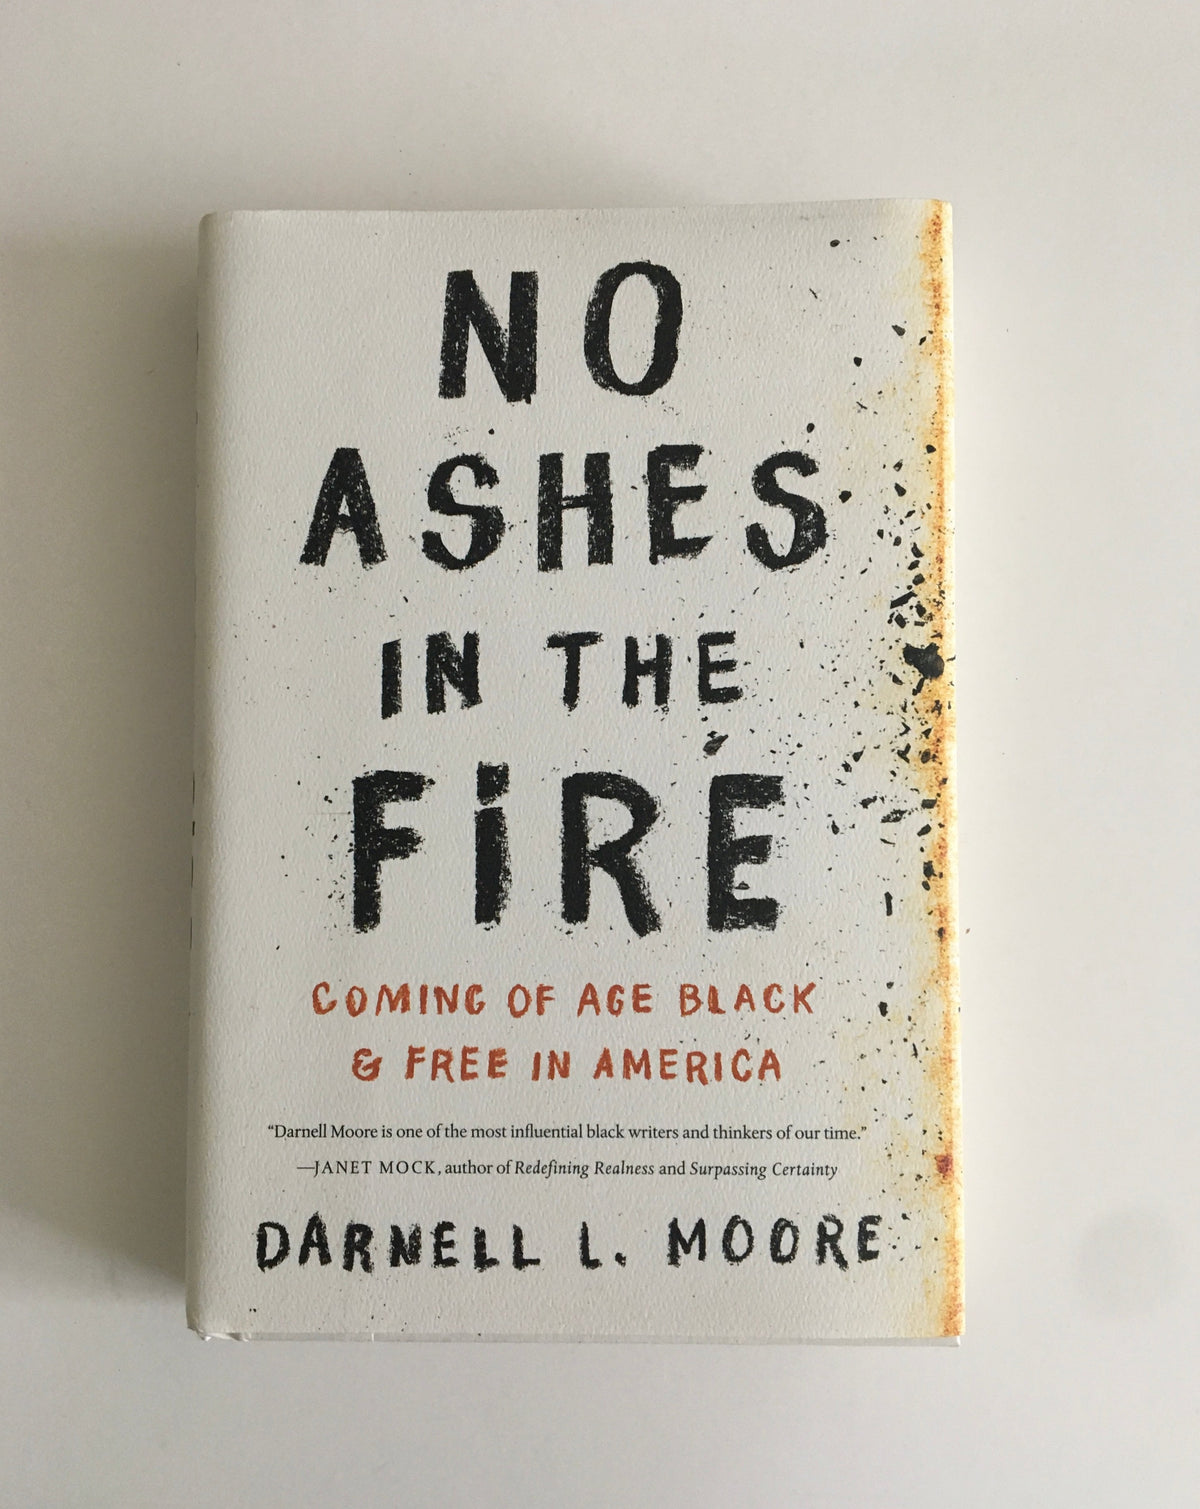 No Ashes in the Fire: Coming of Age Black &amp; Free in America by Darnell L. Moore